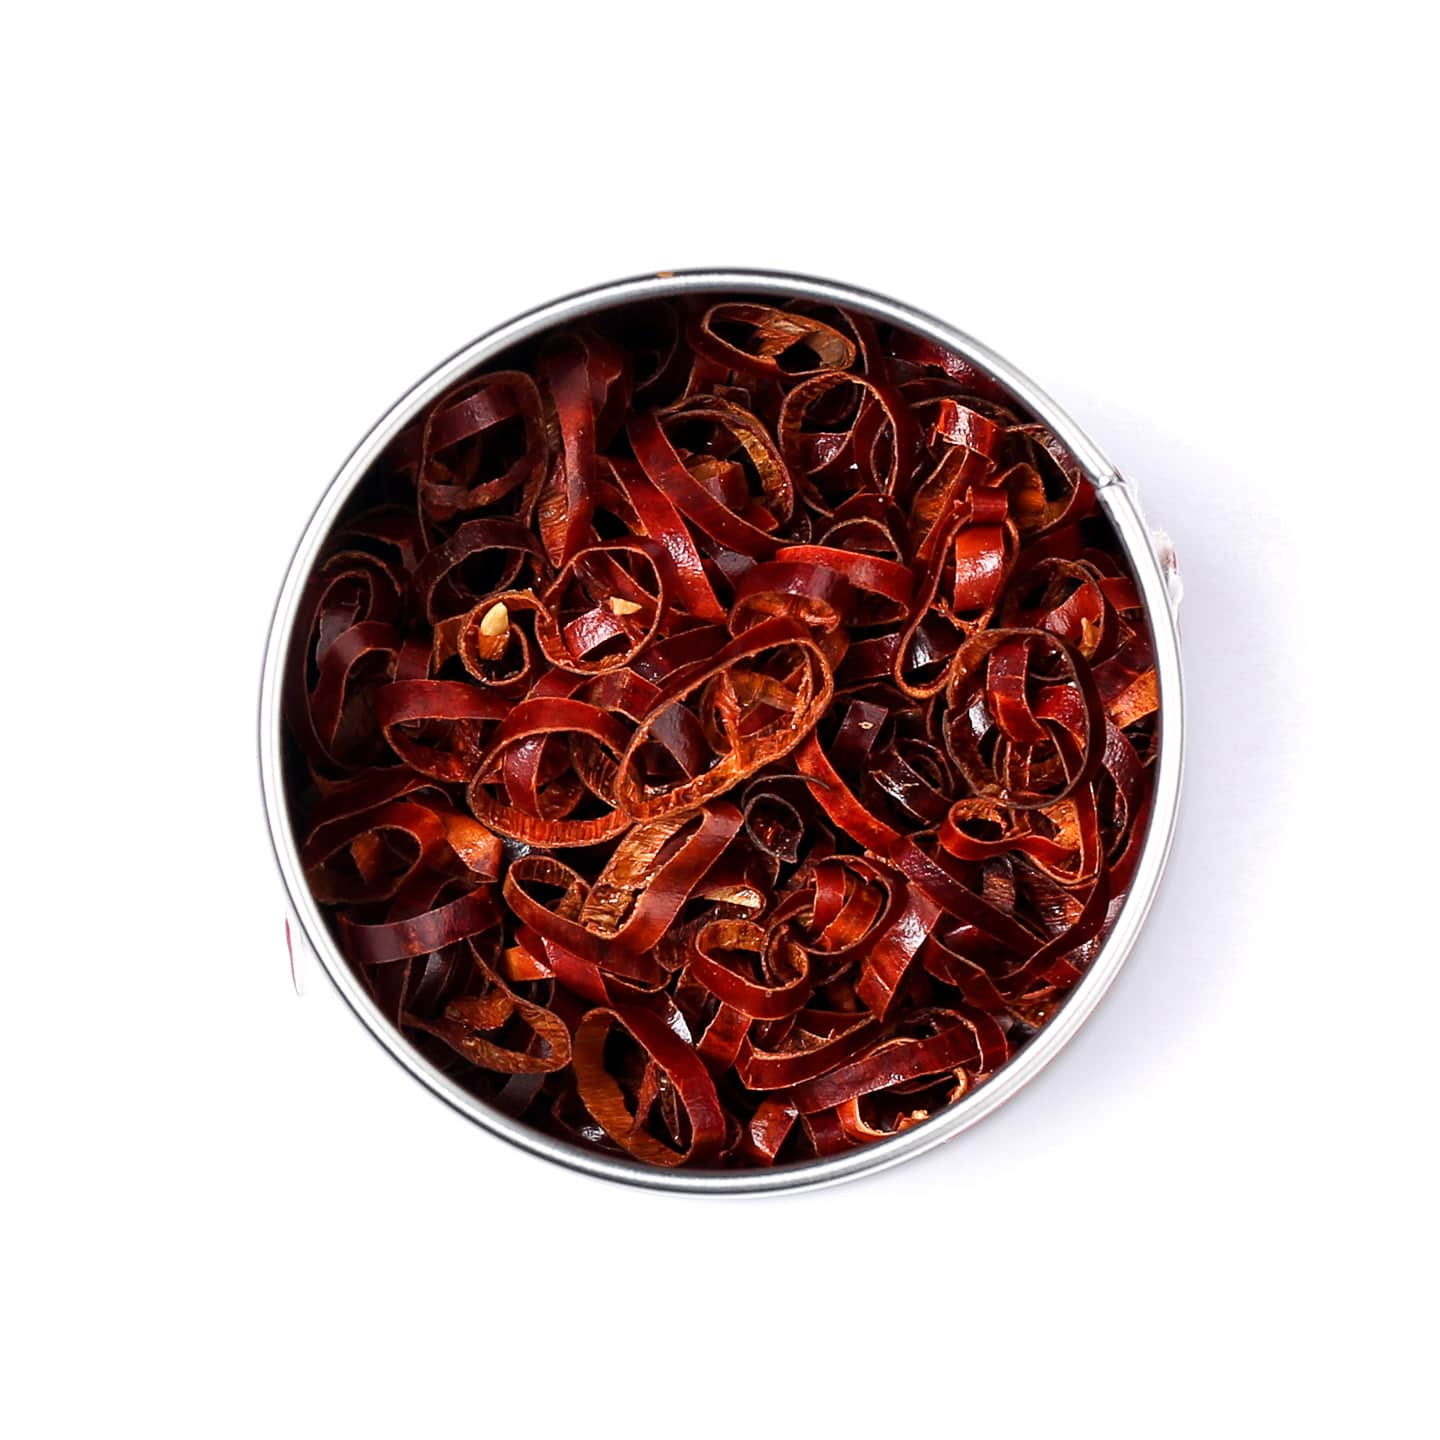 Terre Exotique Rings Of Fire Chilli Pepper, 15g